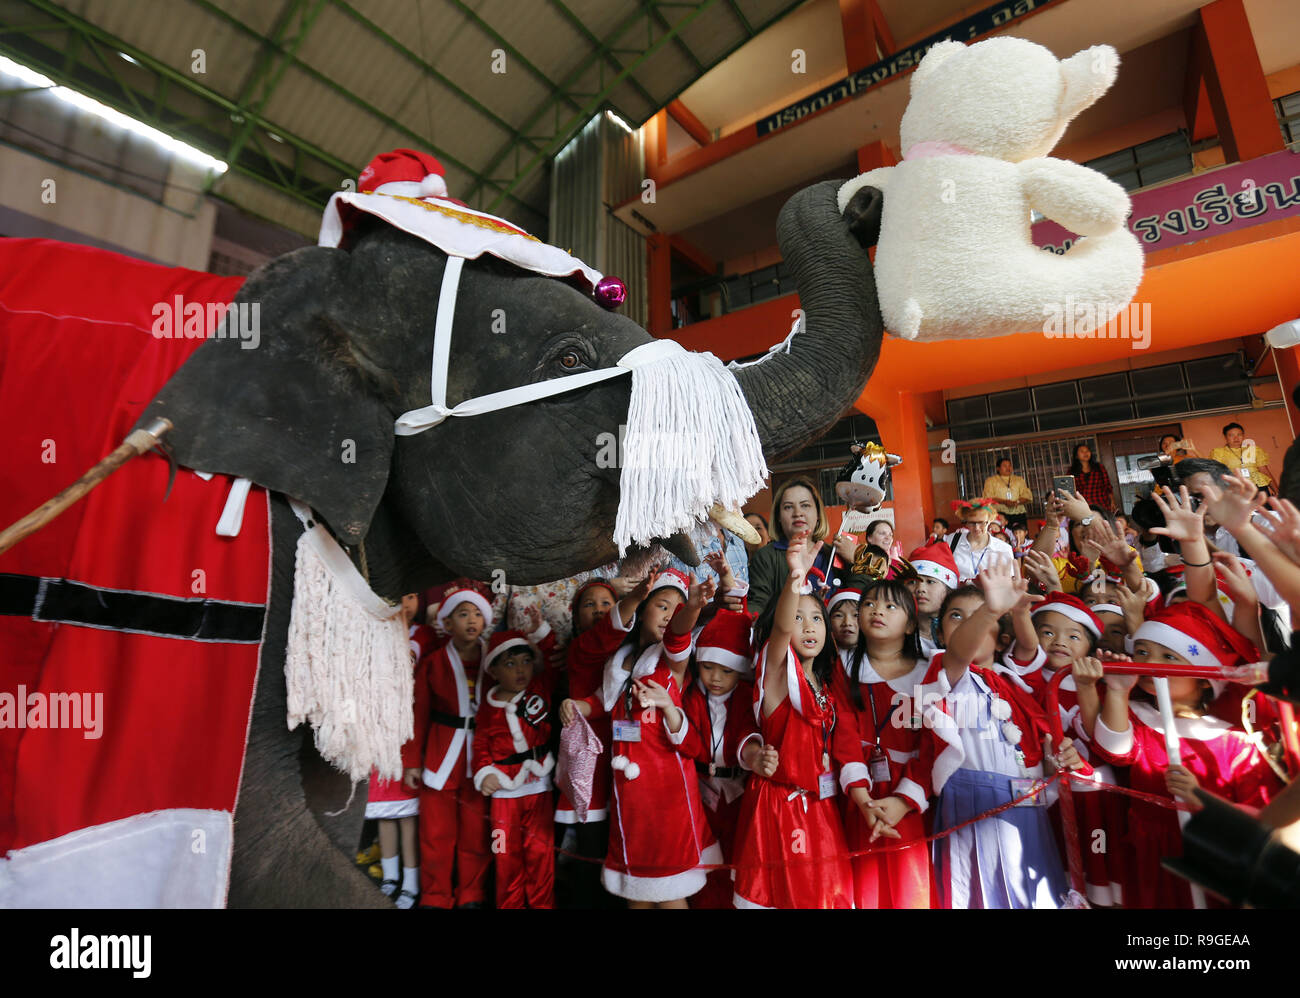 Ayutthaya, Thailand. 24th Dec, 2018. An elephant wearing a Santa Claus costume performs for students during the Christmas celebrations at Jirasart school in Ayutthaya province in the north of Bangkok. Credit: Chaiwat Subprasom/SOPA Images/ZUMA Wire/Alamy Live News Stock Photo